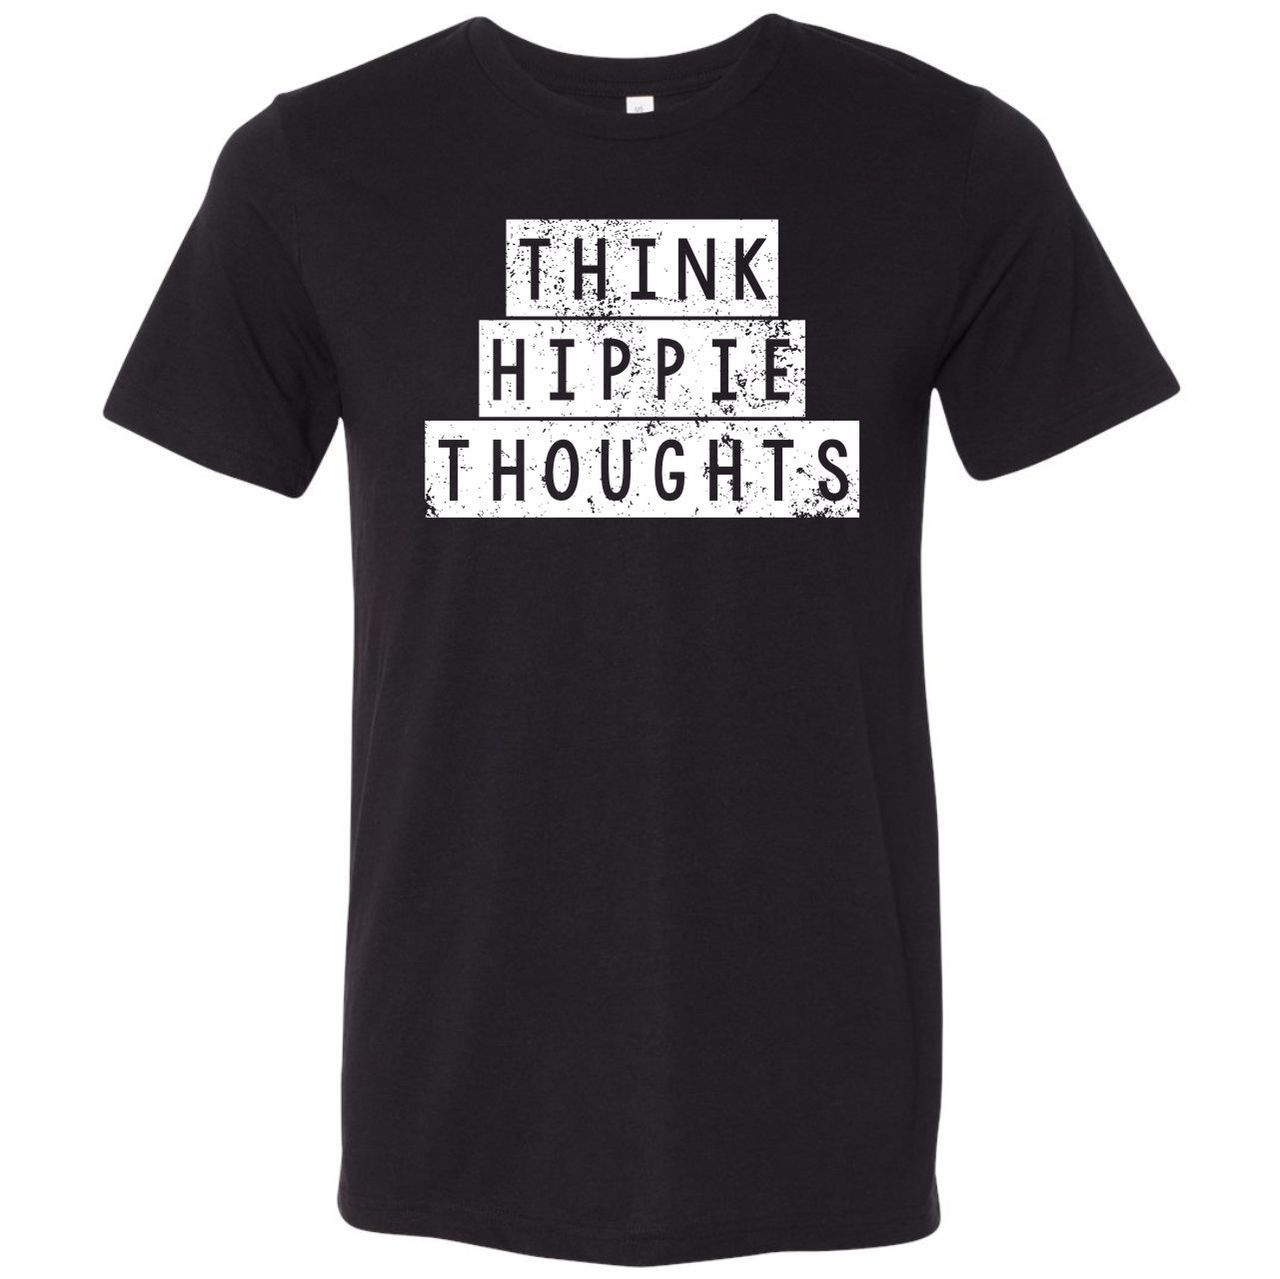 Think Hippie Thoughts - Unisex Tee - The Graphic Tee